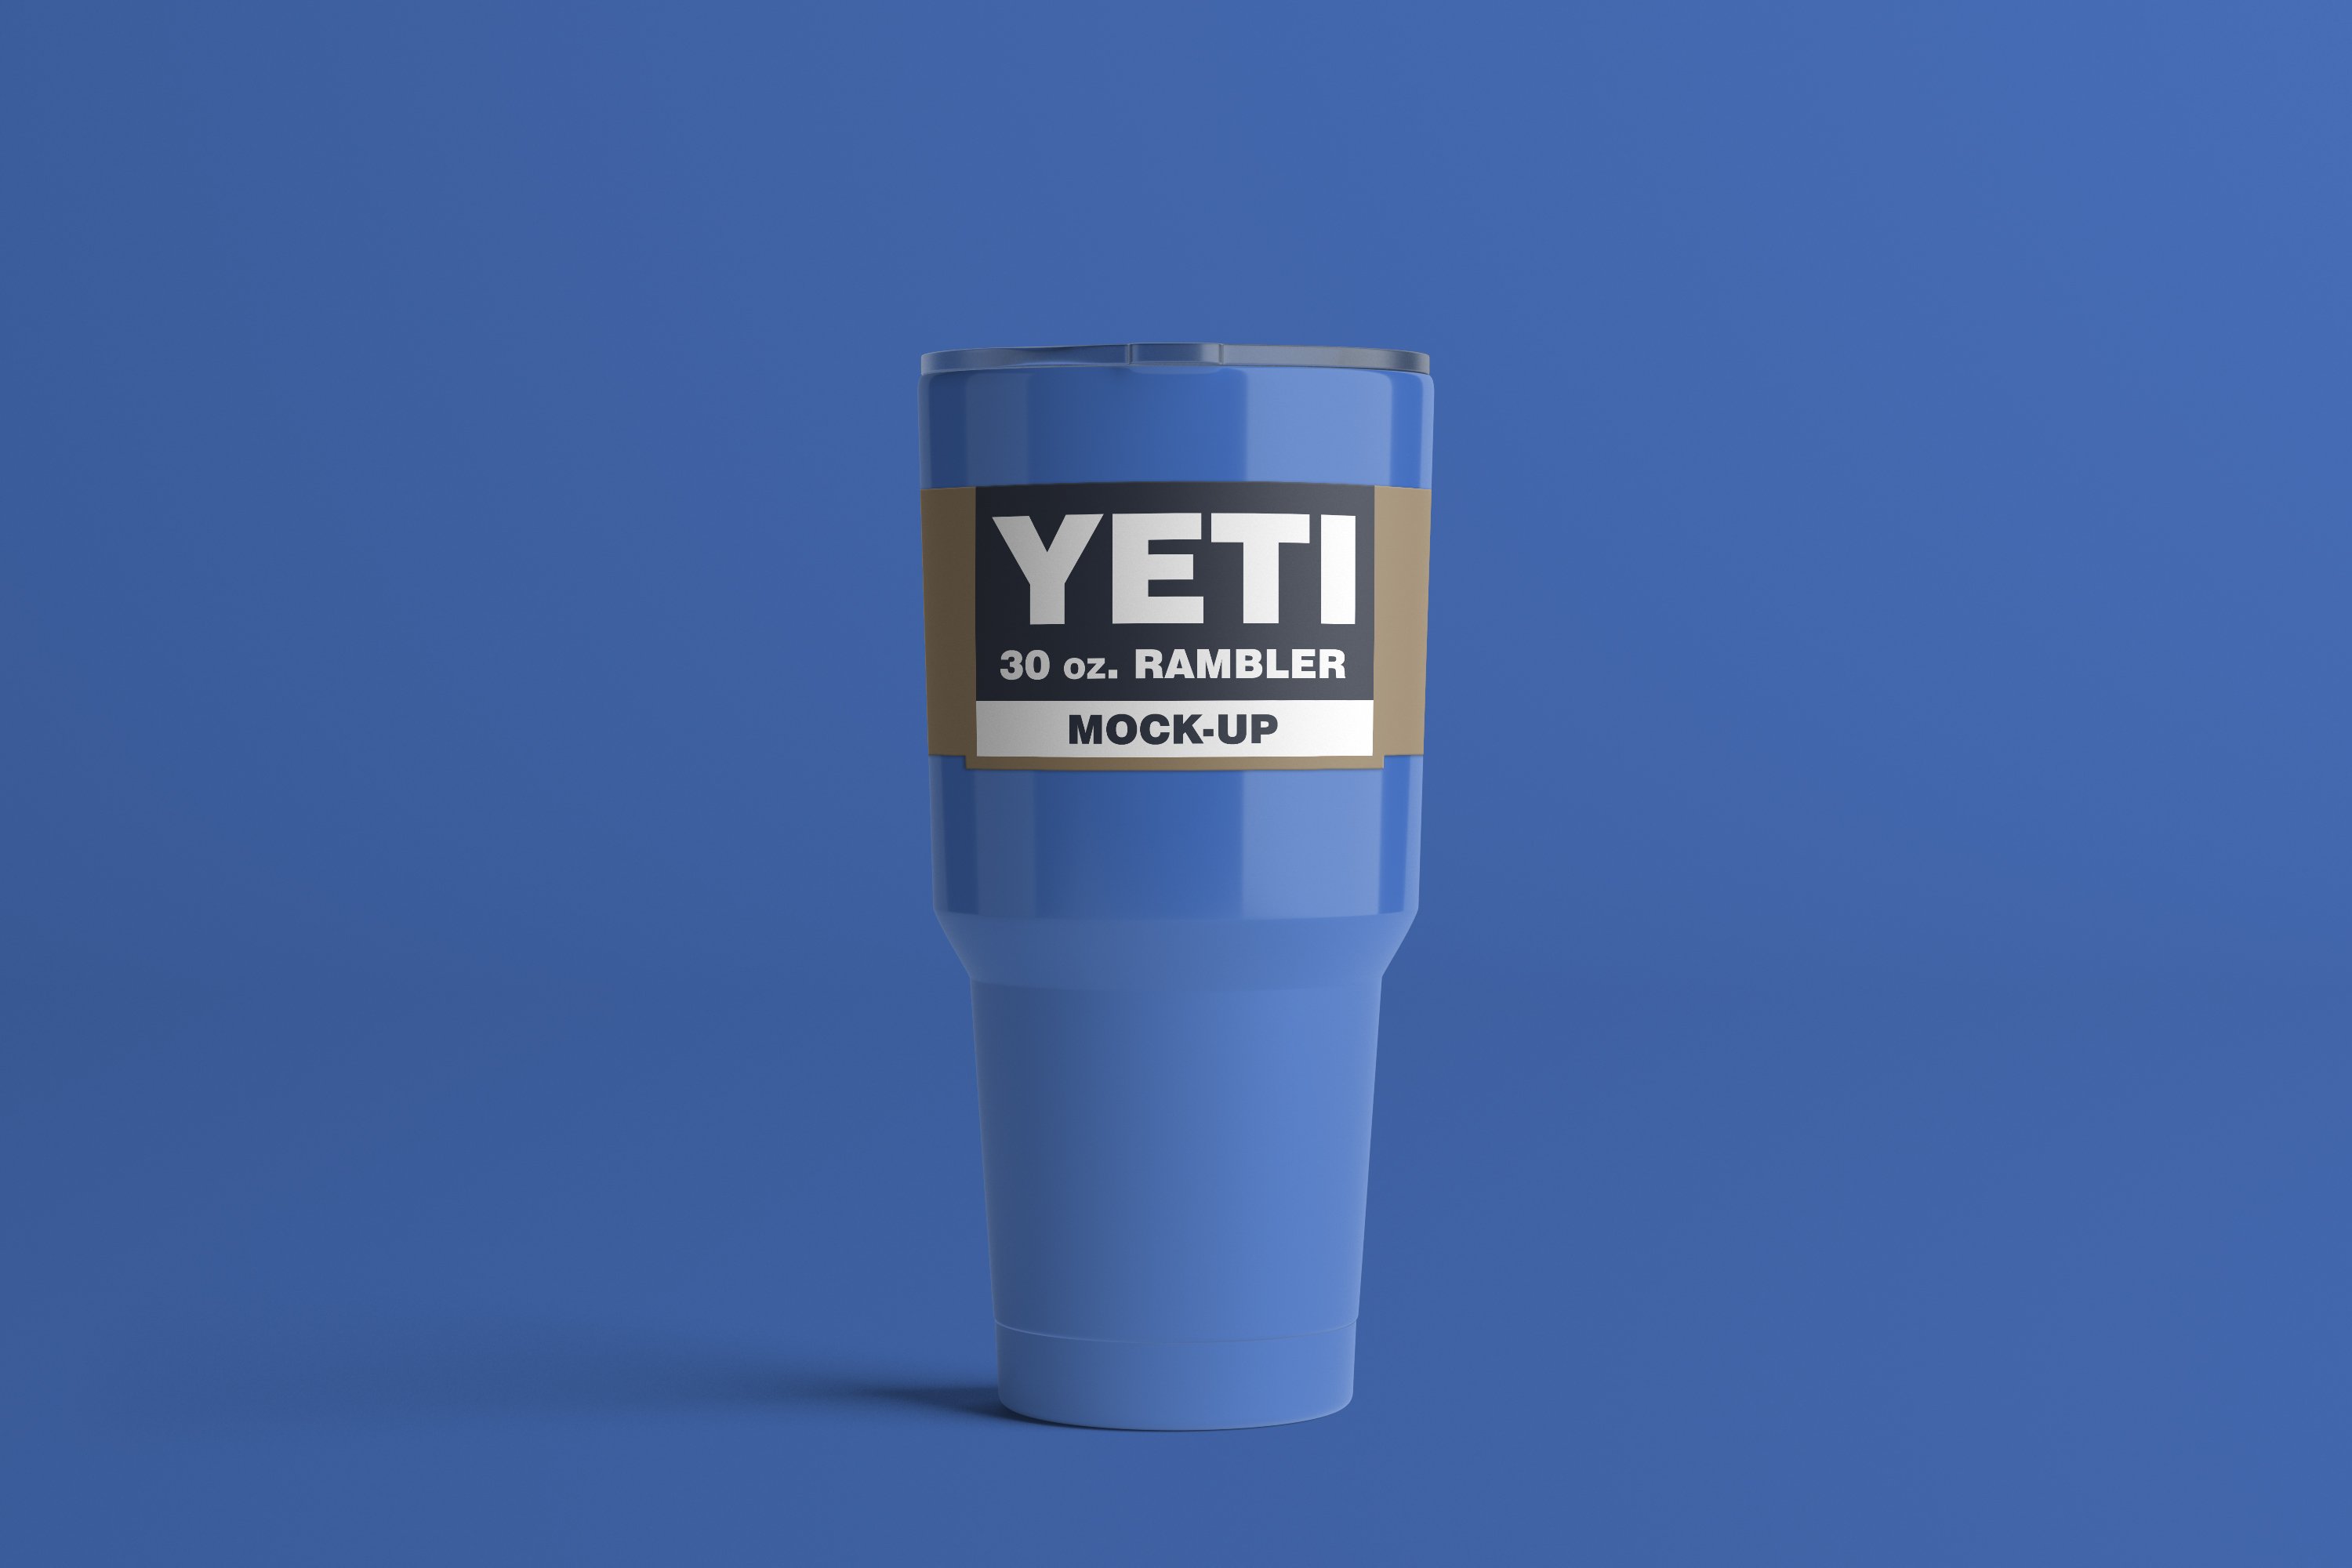 Glance blue yeti cup in a classic style.